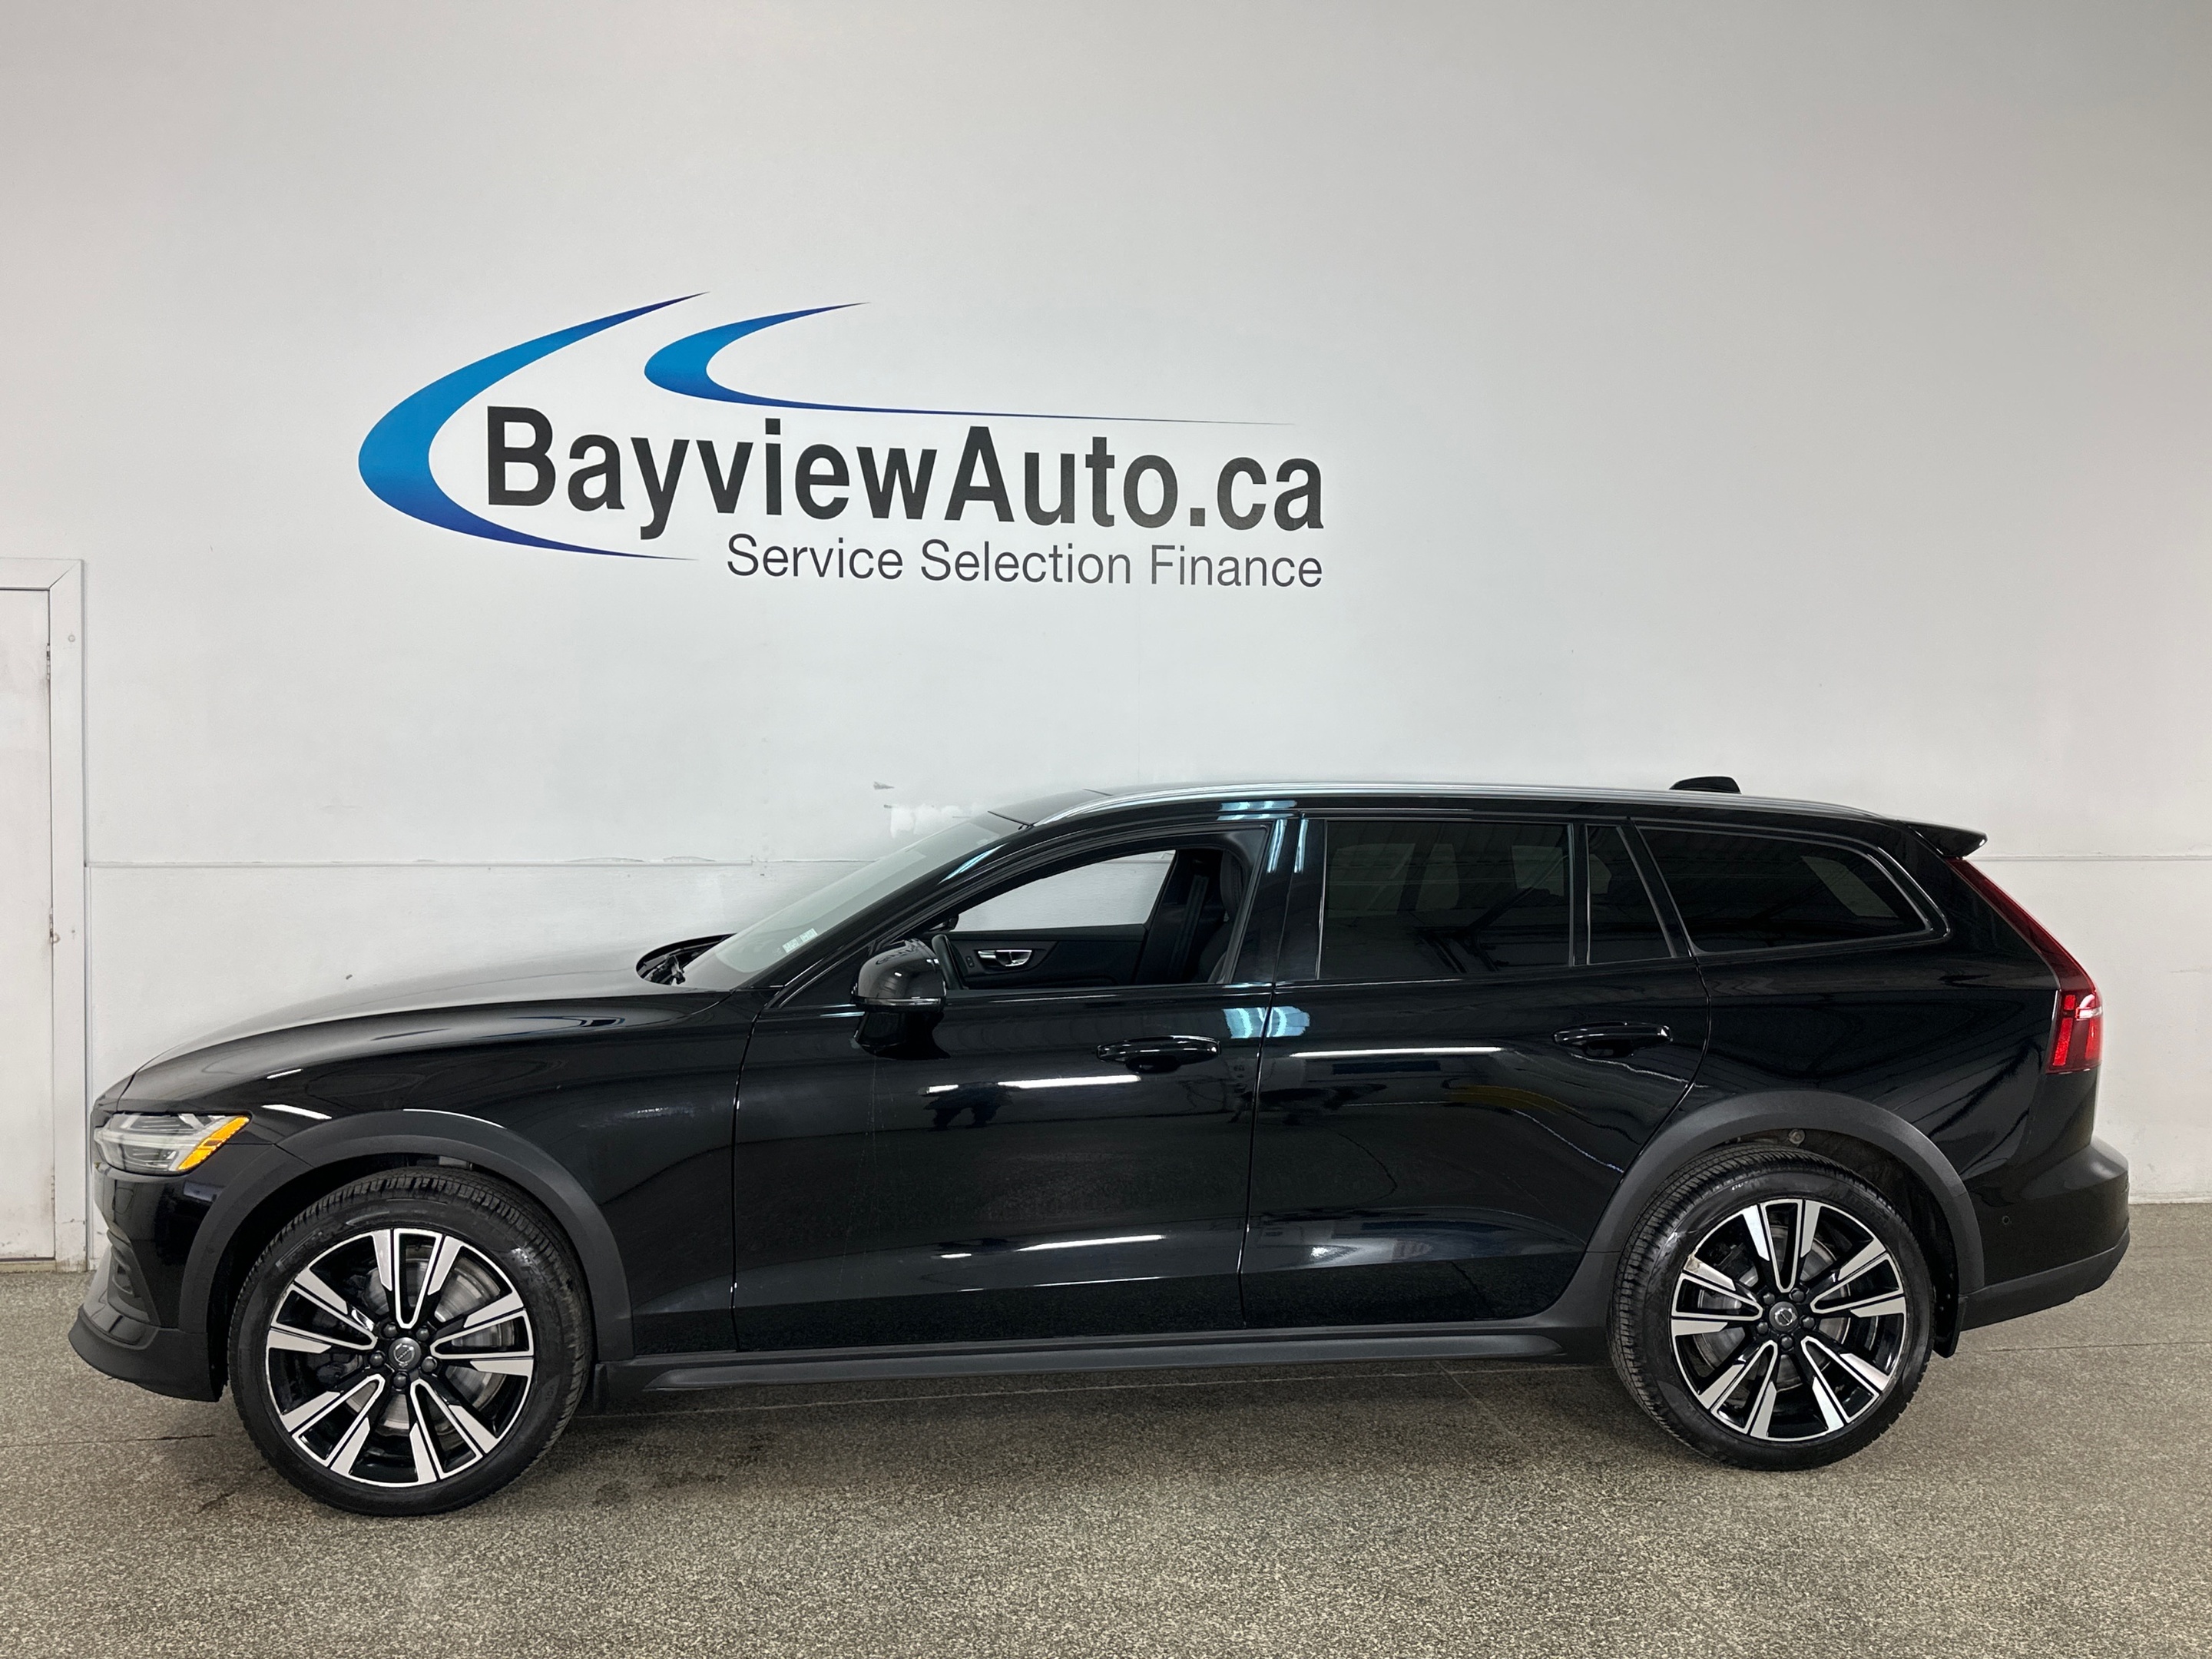 2019 Volvo V60 Cross Country CROSS COUNTRY T5 AWD, LEATHER, NAVI, ROOF, 35KM!